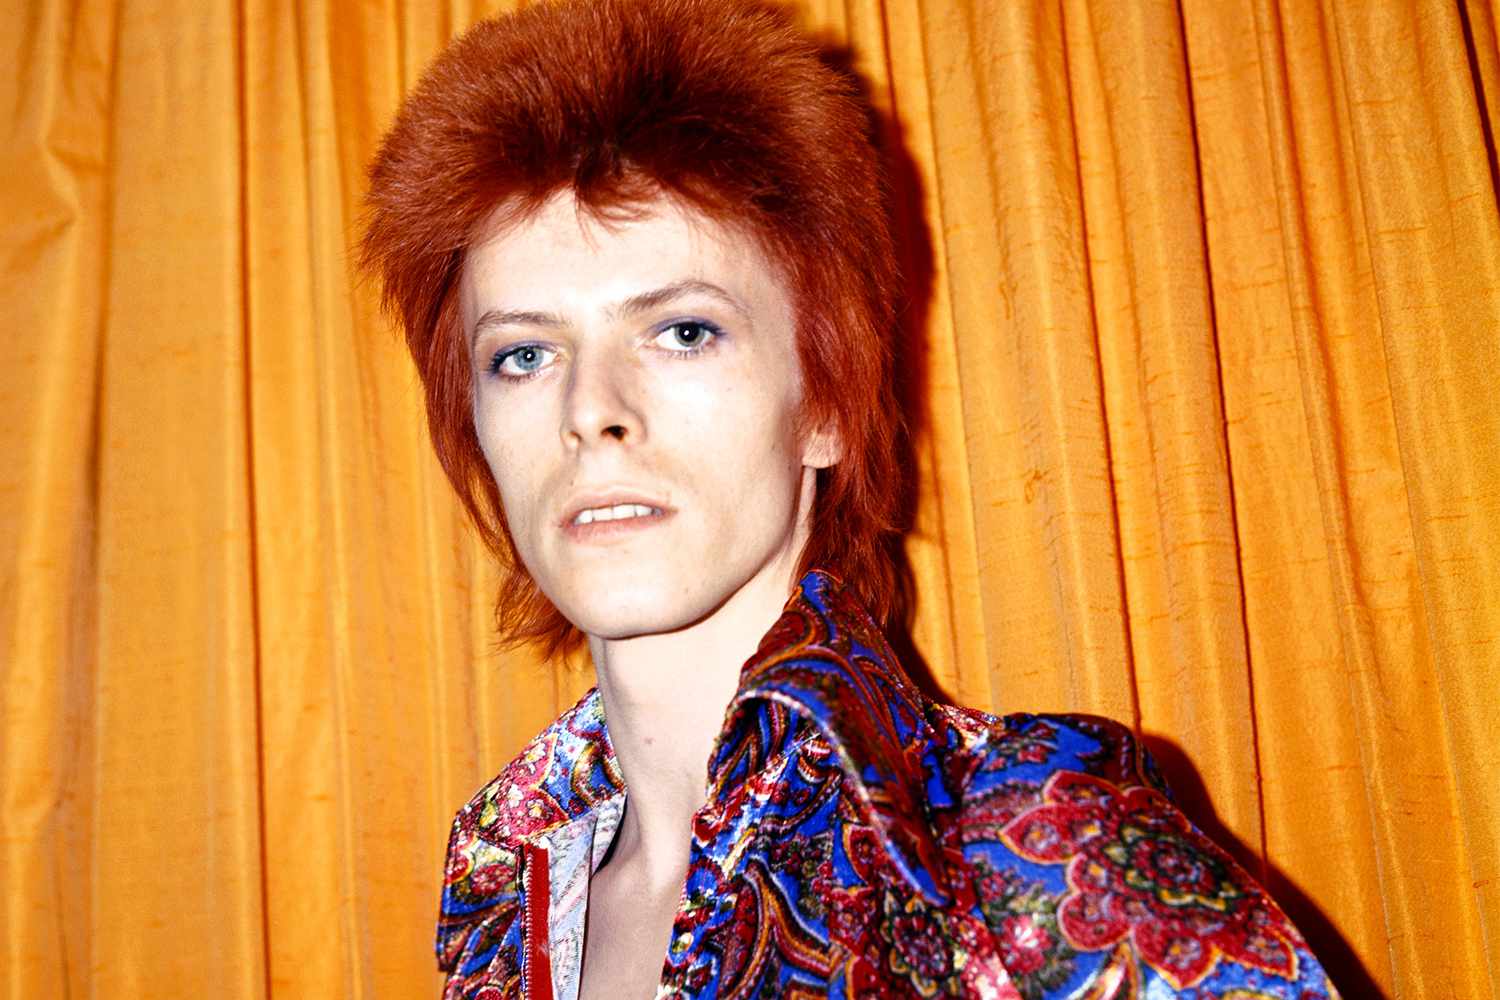 Featured image for “David Bowie”